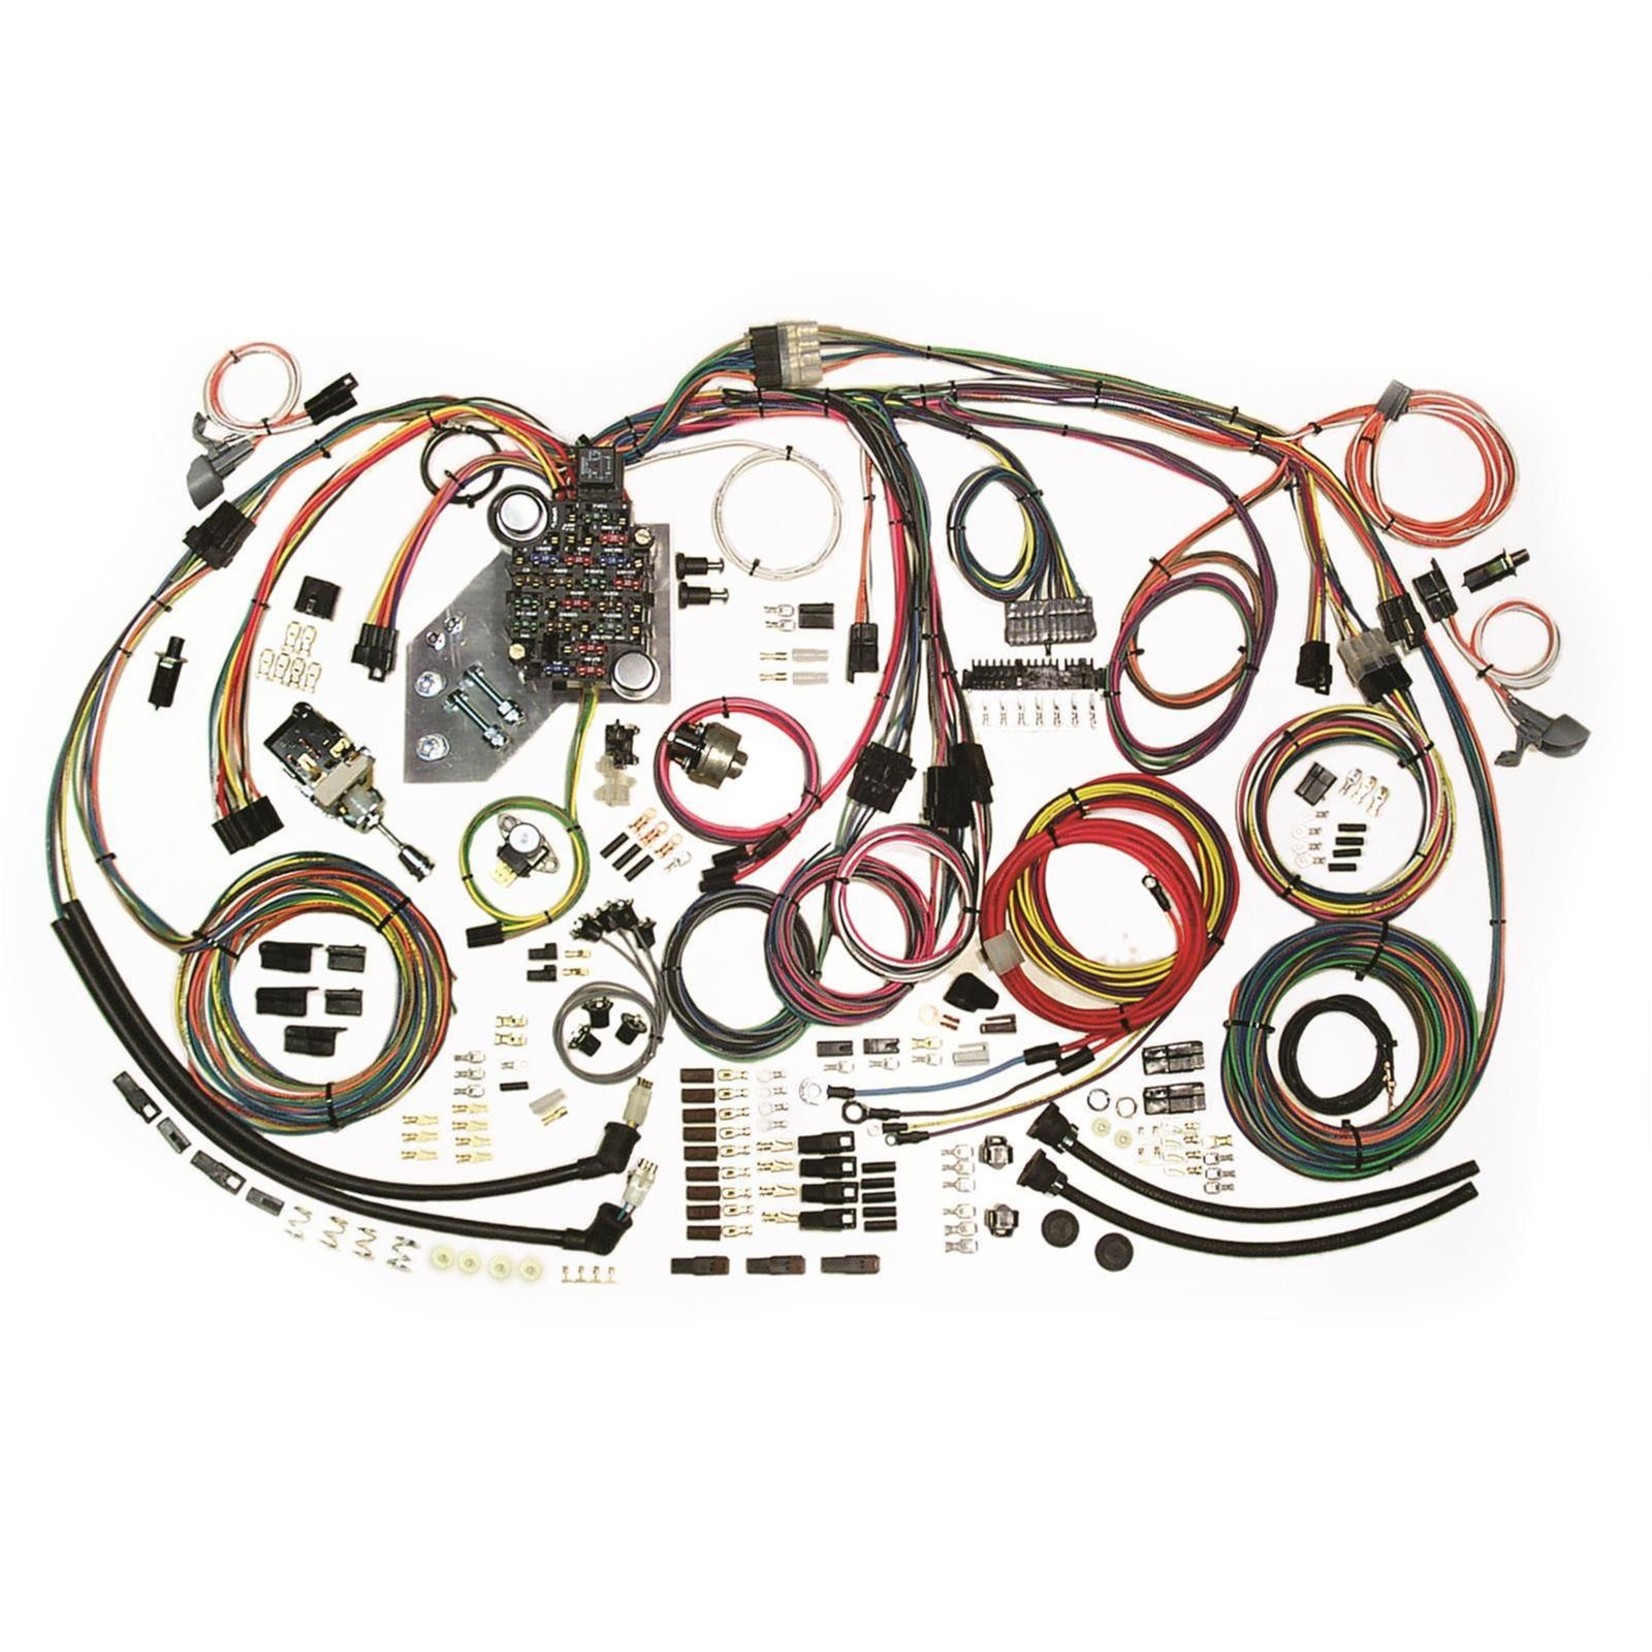 American autowire 1947-55 Chevy 3100 Classic Update wiring harness kit